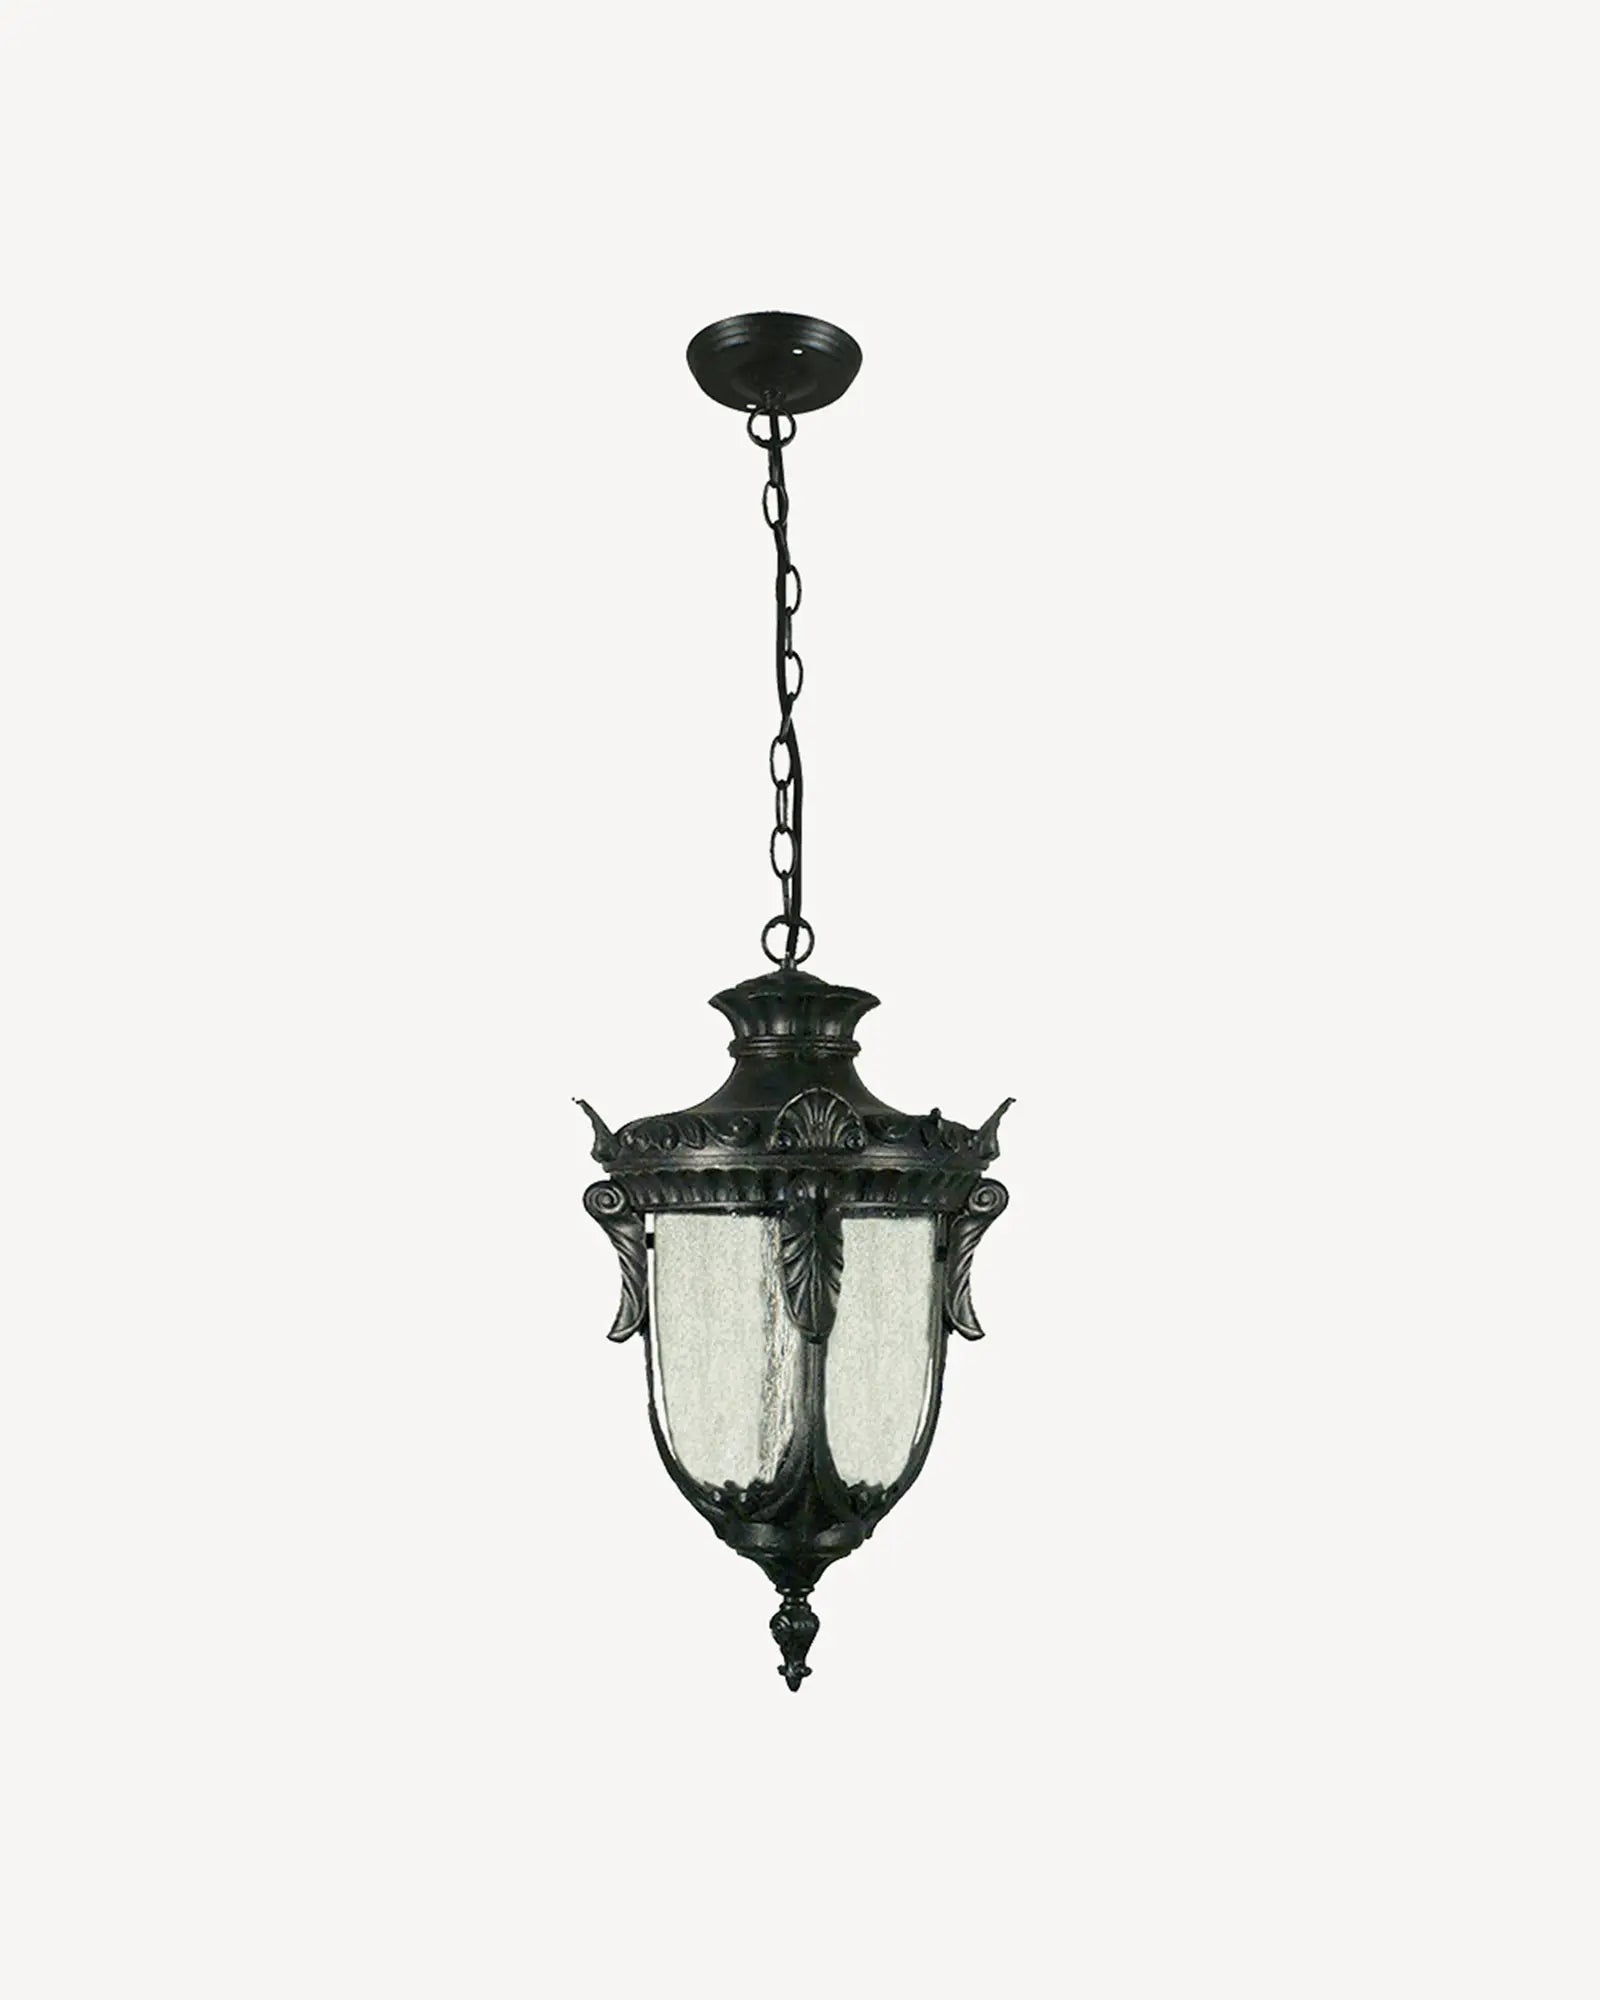 Wellington chain pendant light by Inspiration Light at Nook Collections